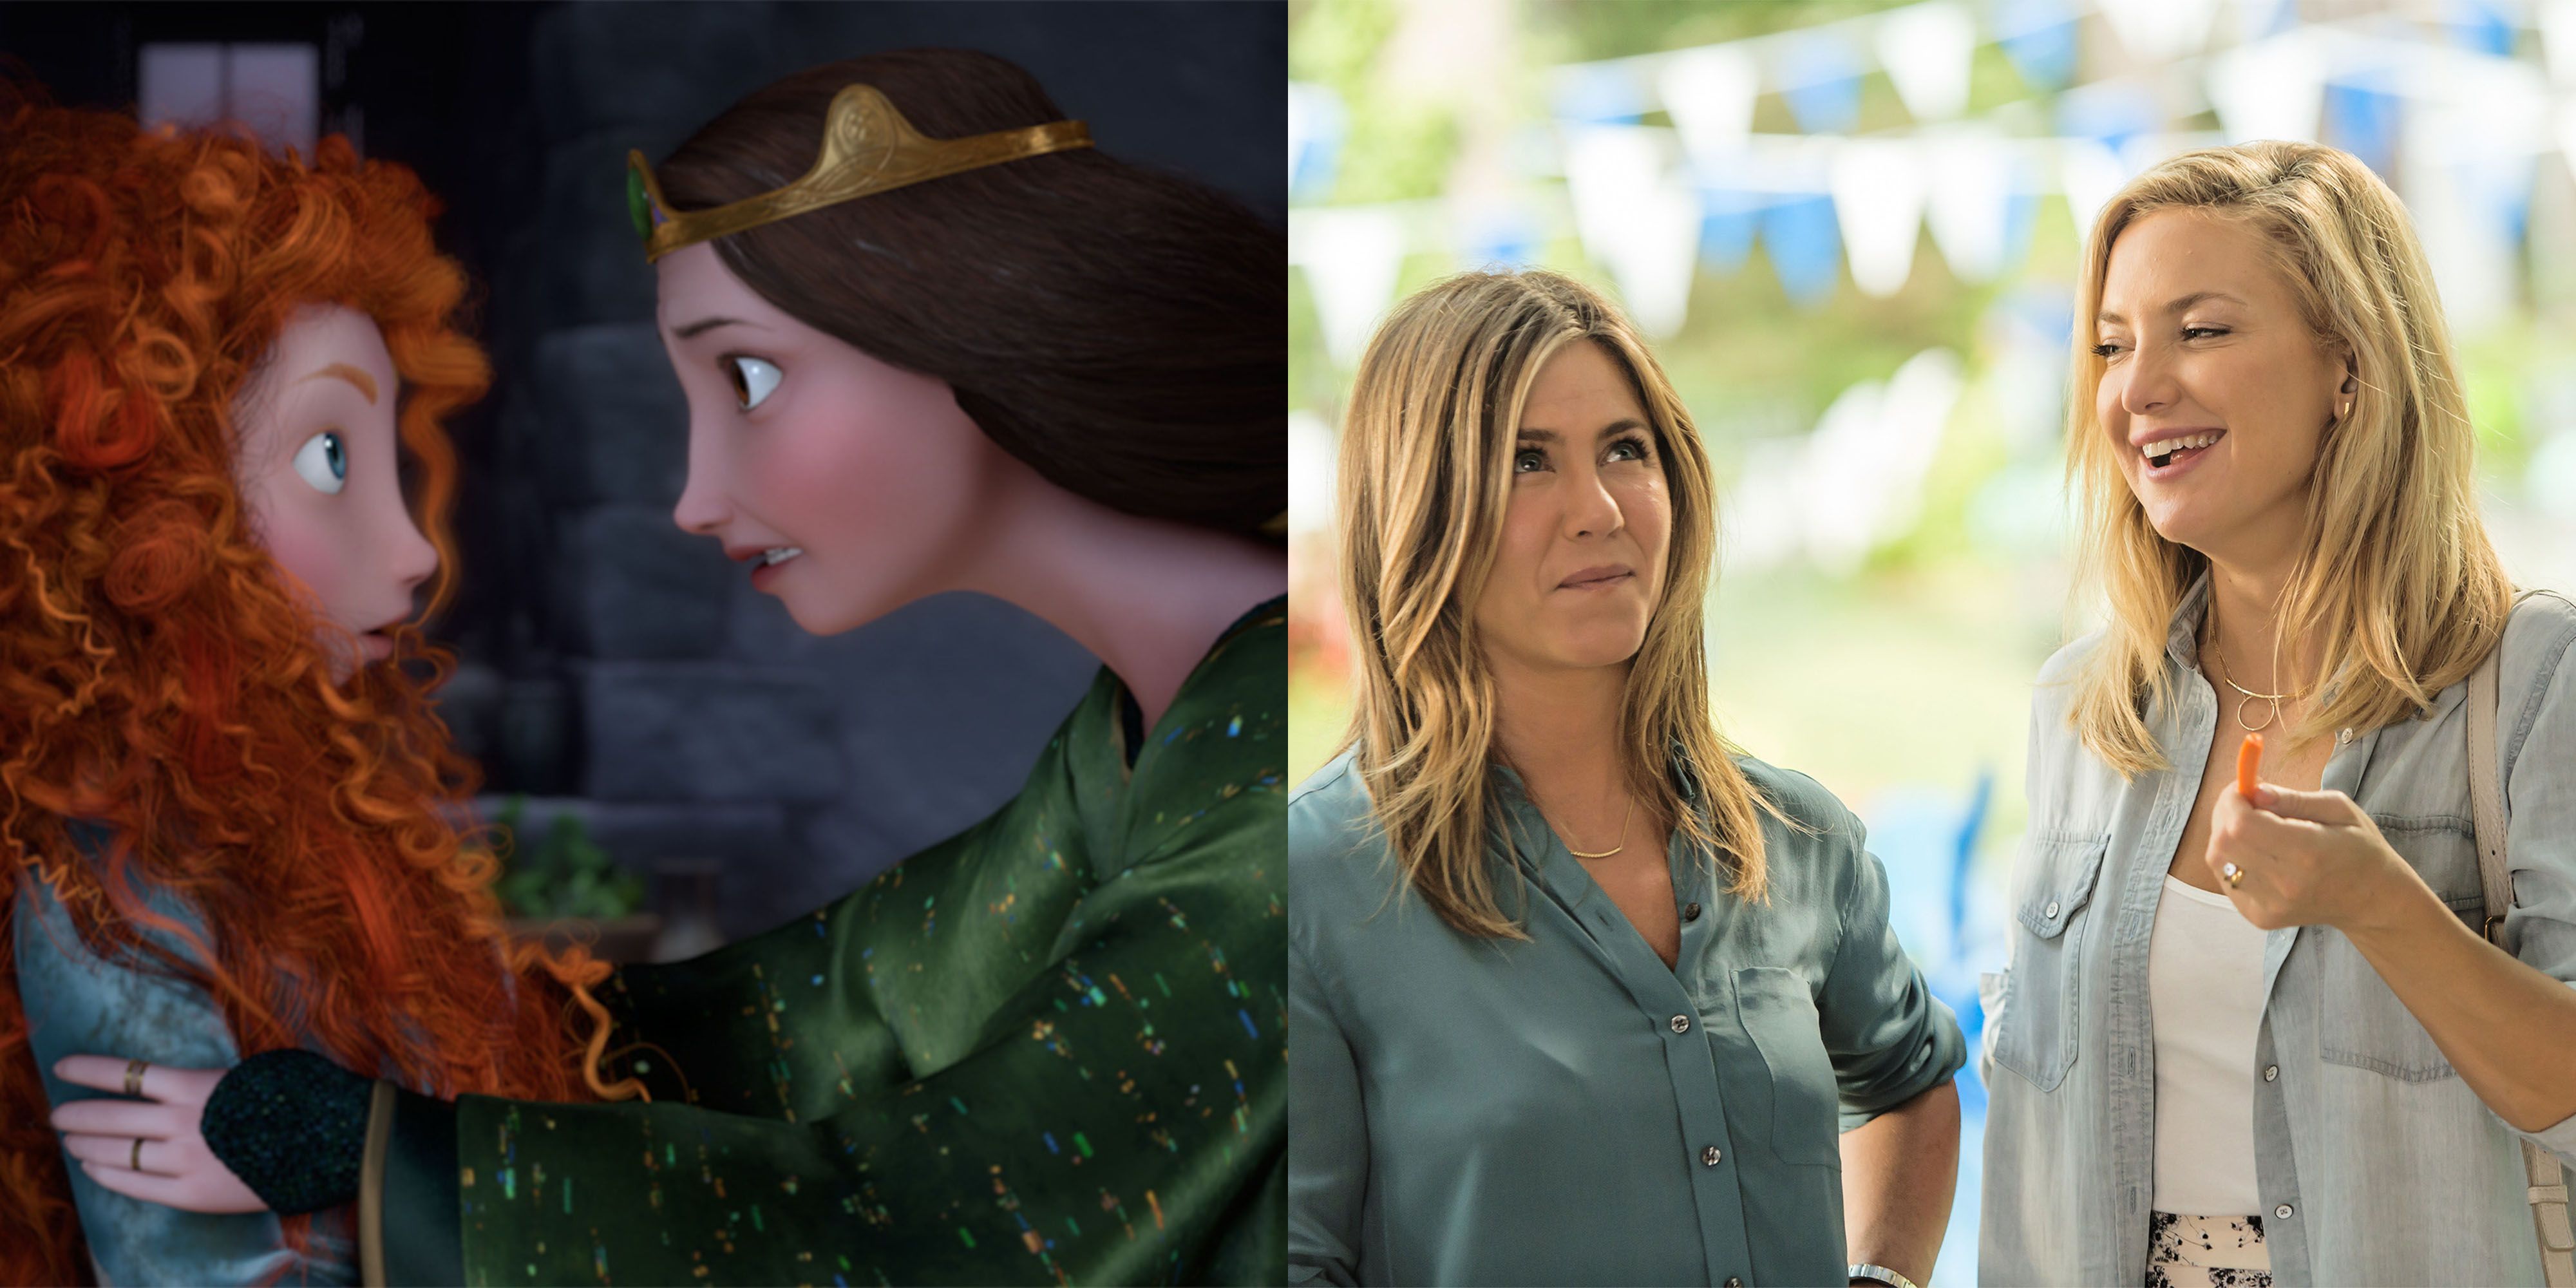 The 25 Best Mother's Day Movies for 2021